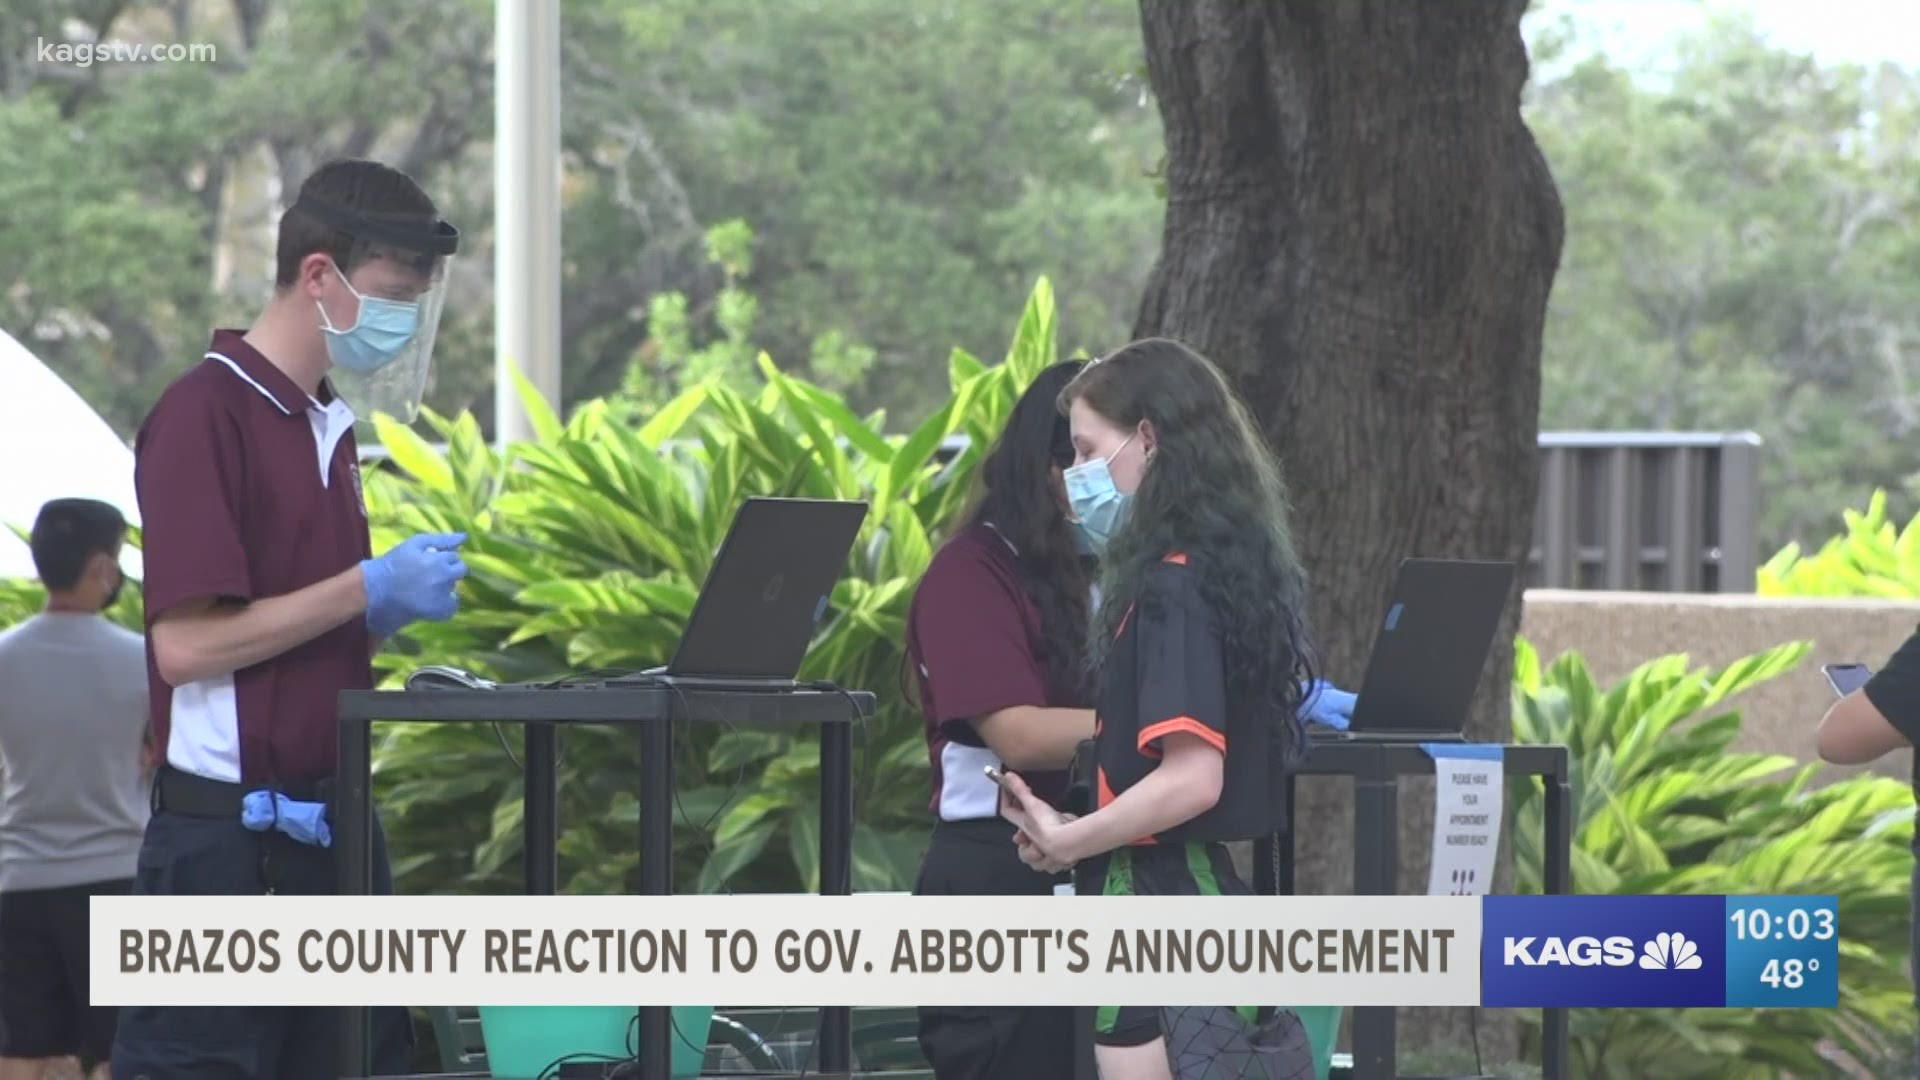 Brazos Valley County Judge Duane Peters and Texas A&M Epidemiologist Rebecca Fischer share their thoughts and expertise on Gov. Abbott's announcement.